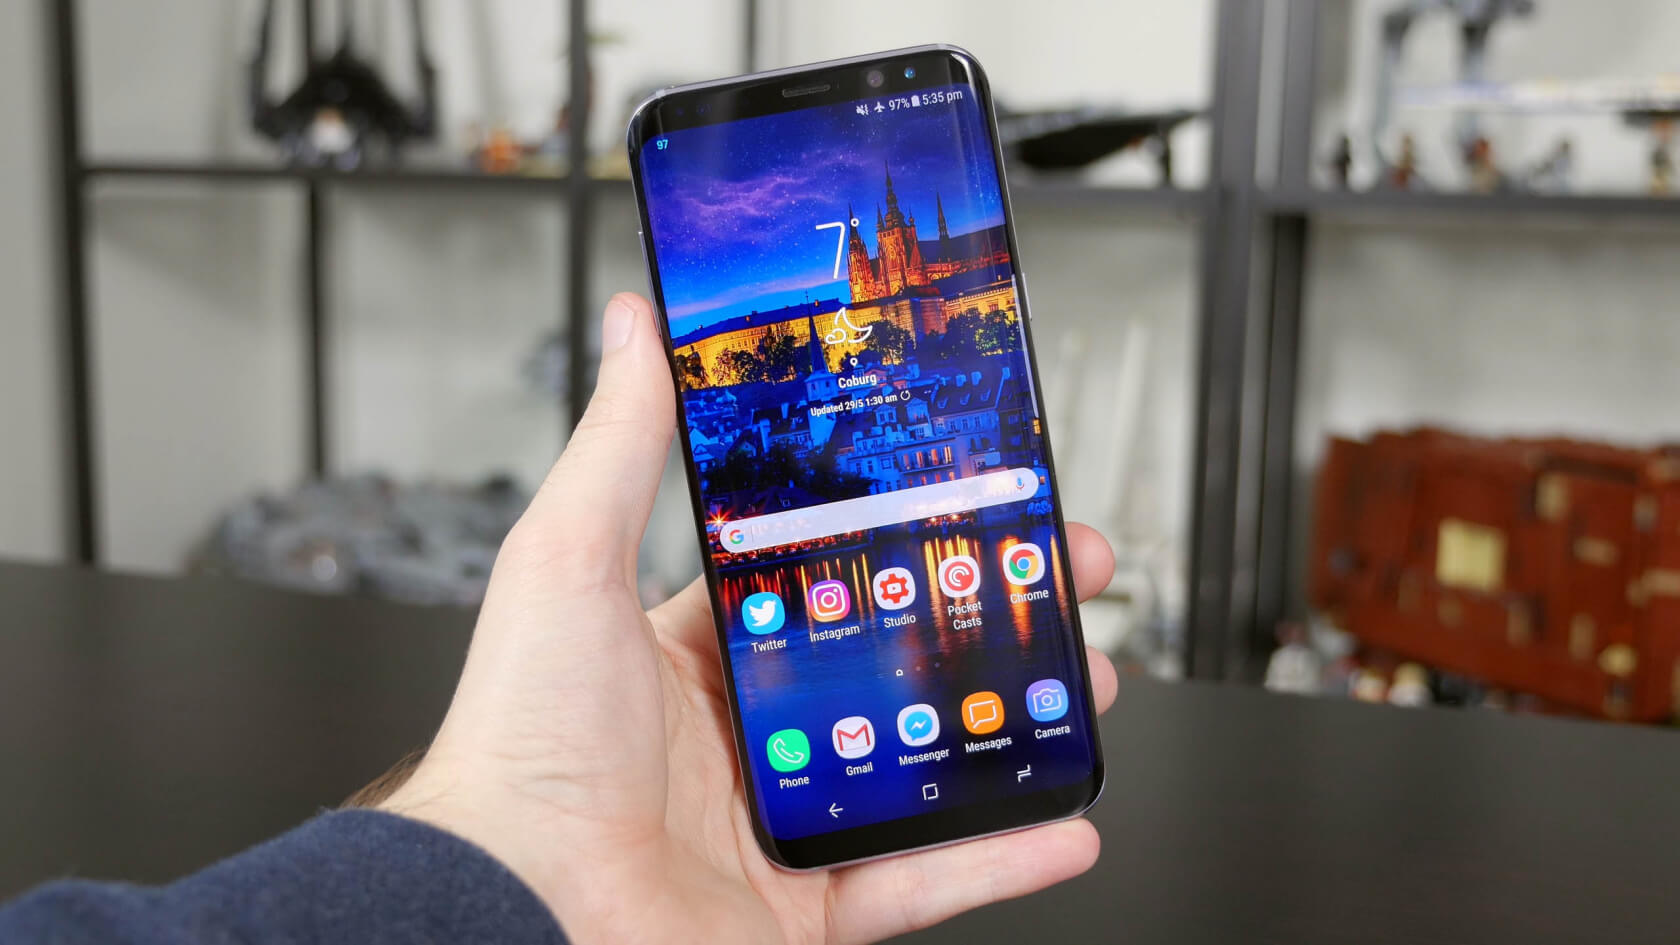 Samsung reportedly testing multiple solutions to embed fingerprint sensor in Note 9 display